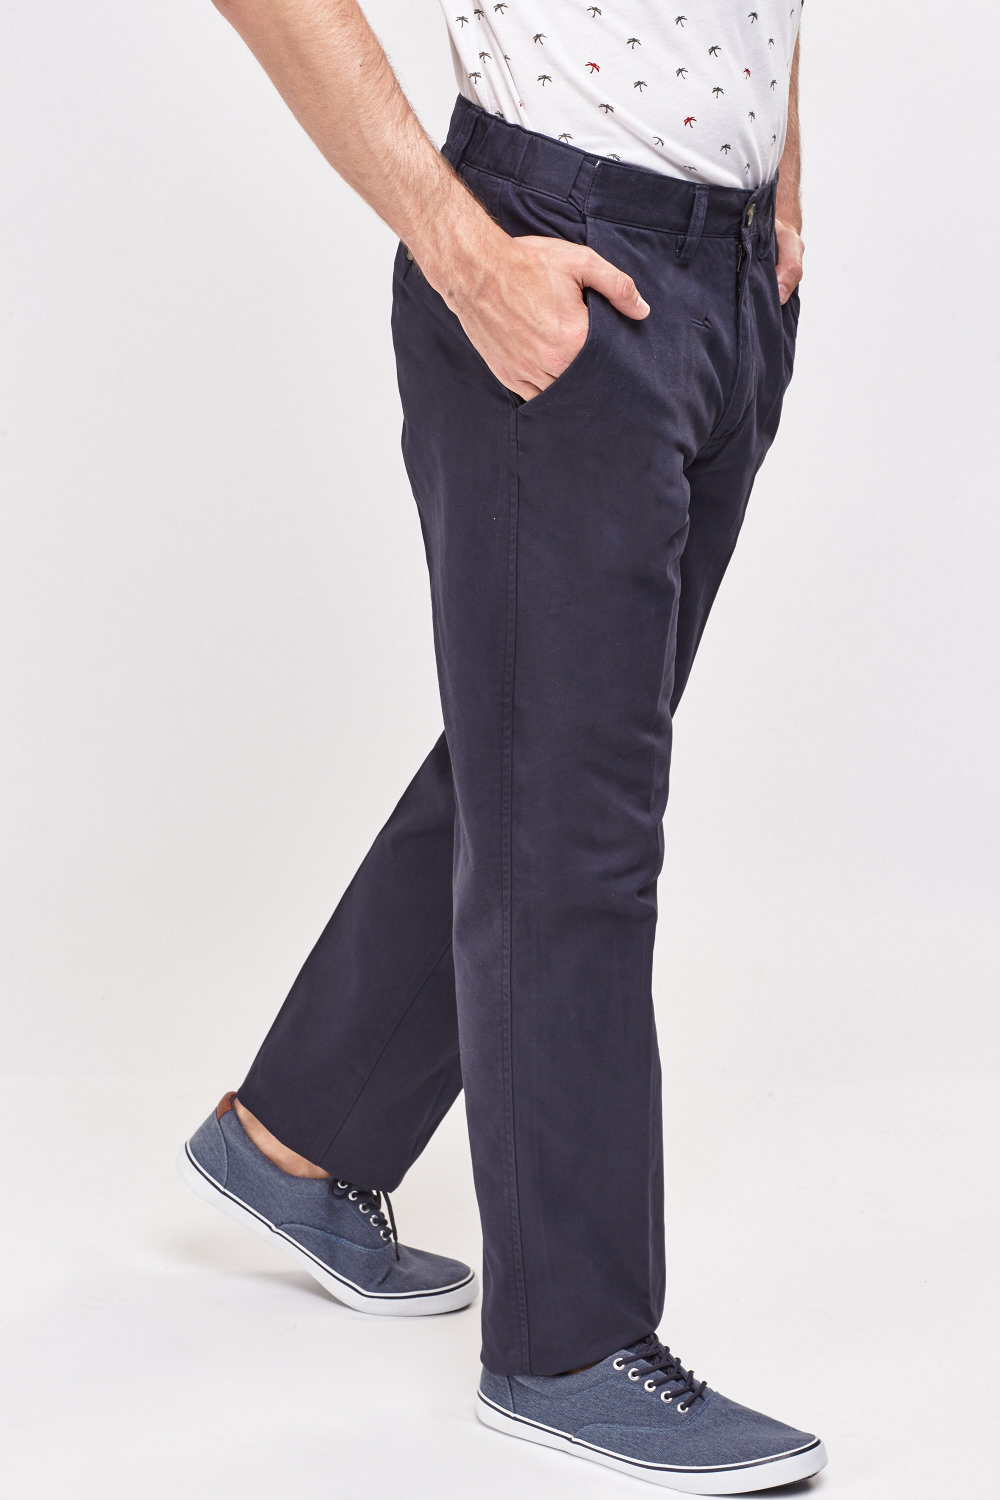 Straight Leg Casual Chino Mens Trousers - Just $6